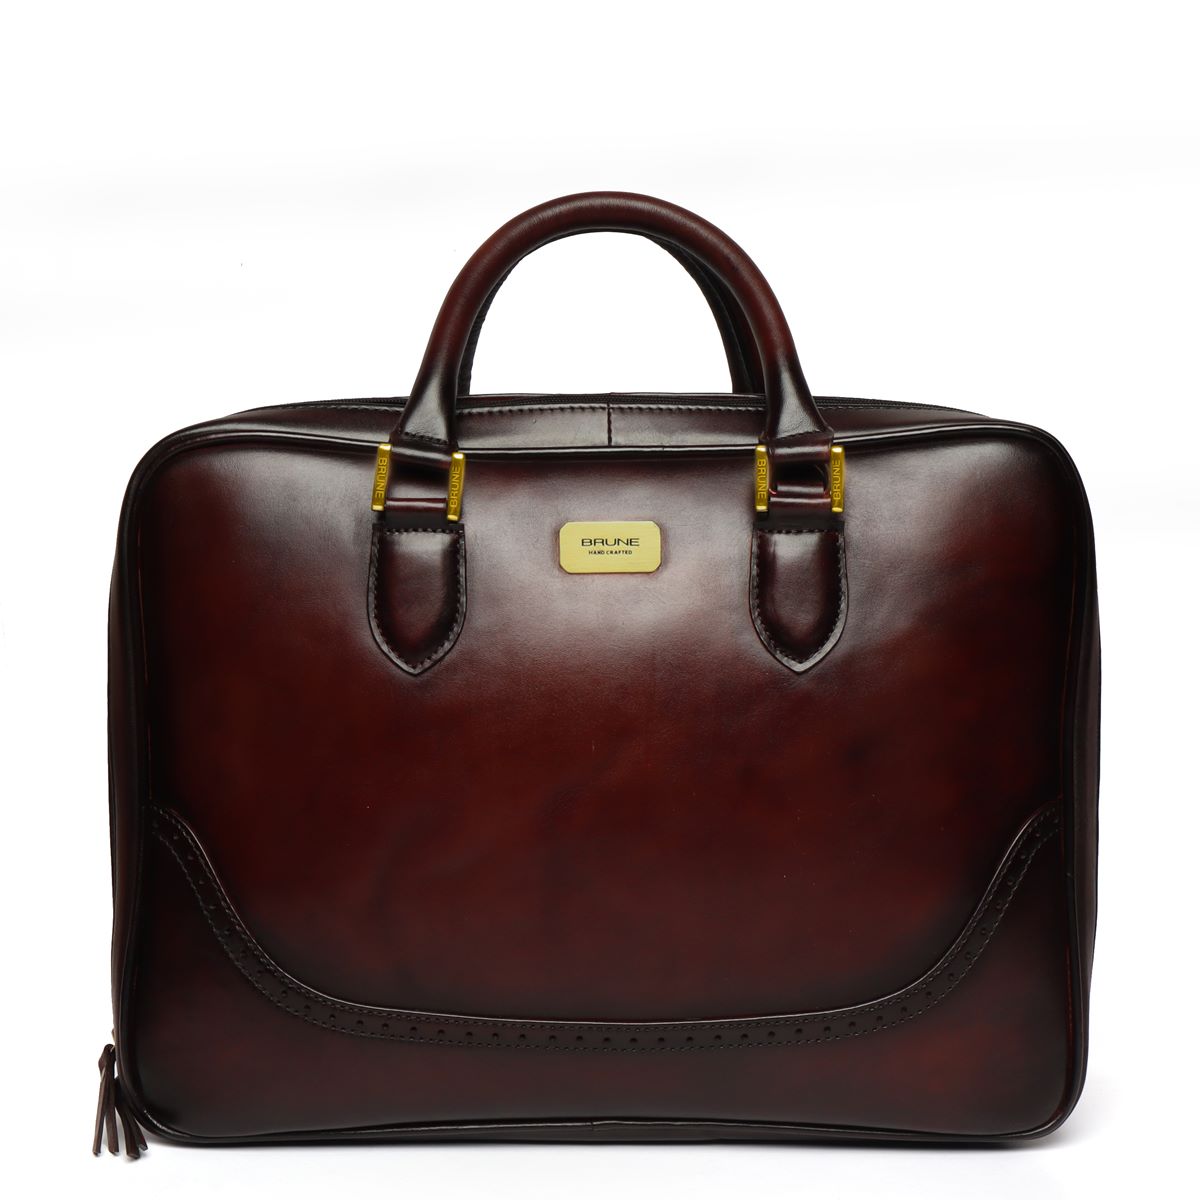 Brogue Detailing Laptop/Office Briefcase in Dark Brown Leather With Extra Compartment